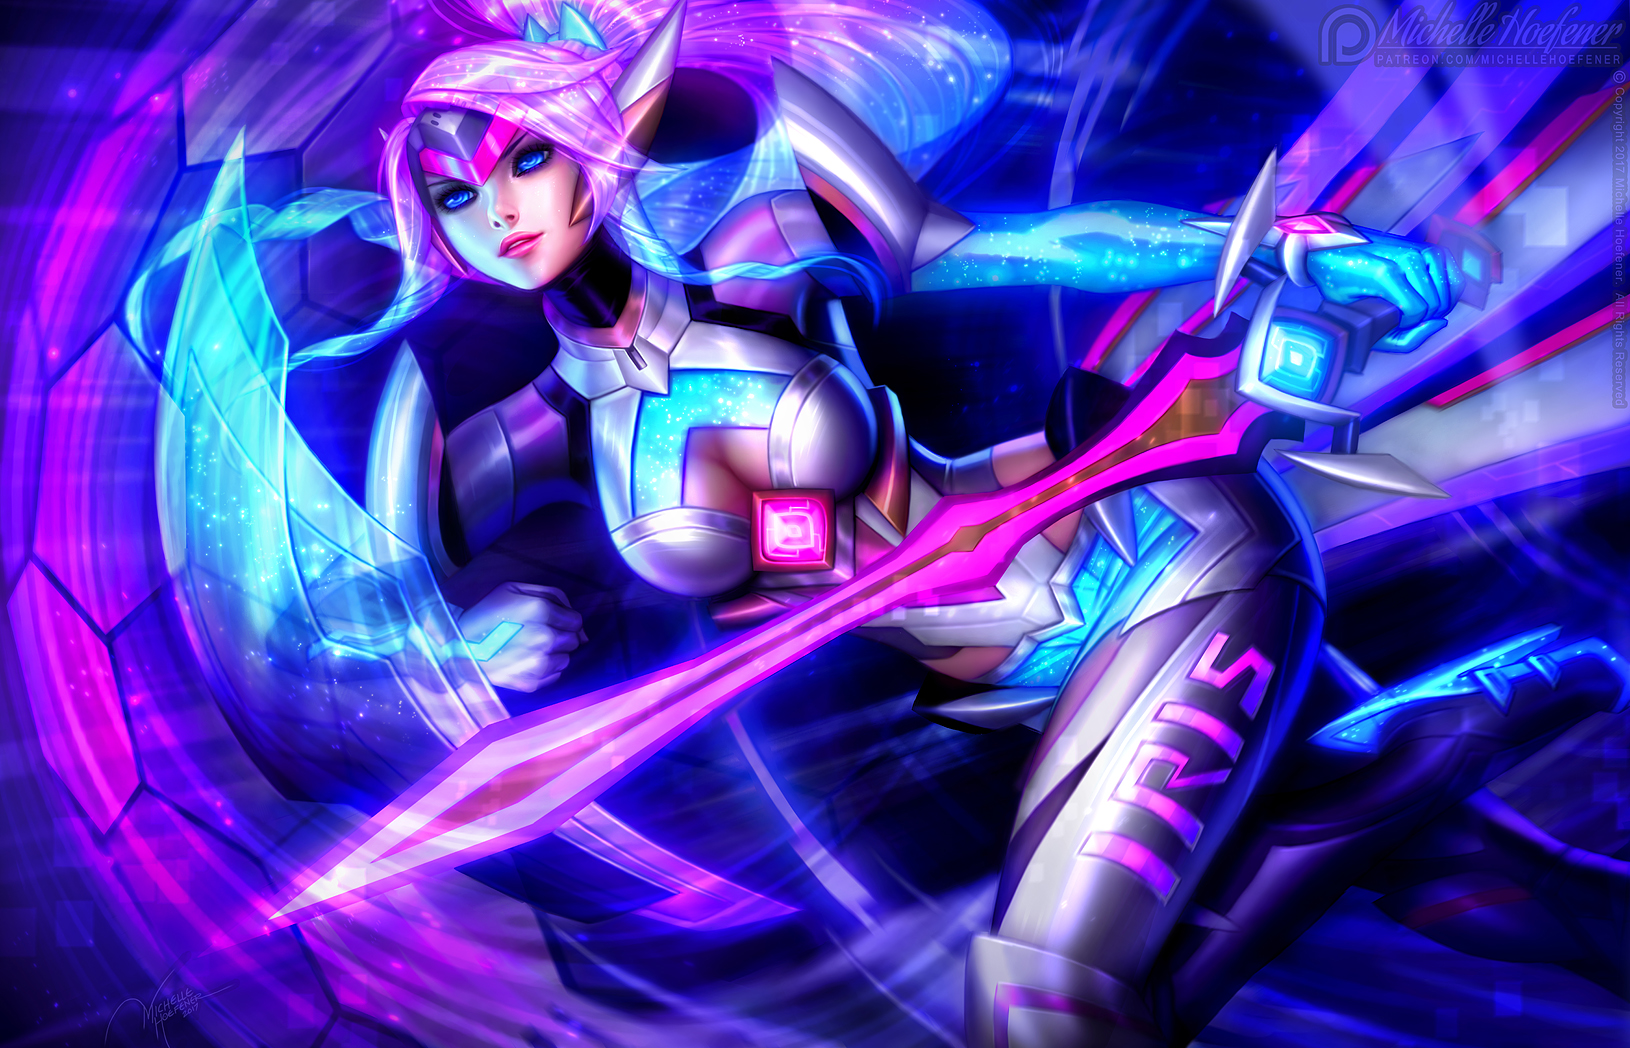 General 1630x1048 Michelle Hoefener drawing women pink hair ponytail blue eyes armor shield weapon sword pink blue glowing colorful fighting spell fantasy art